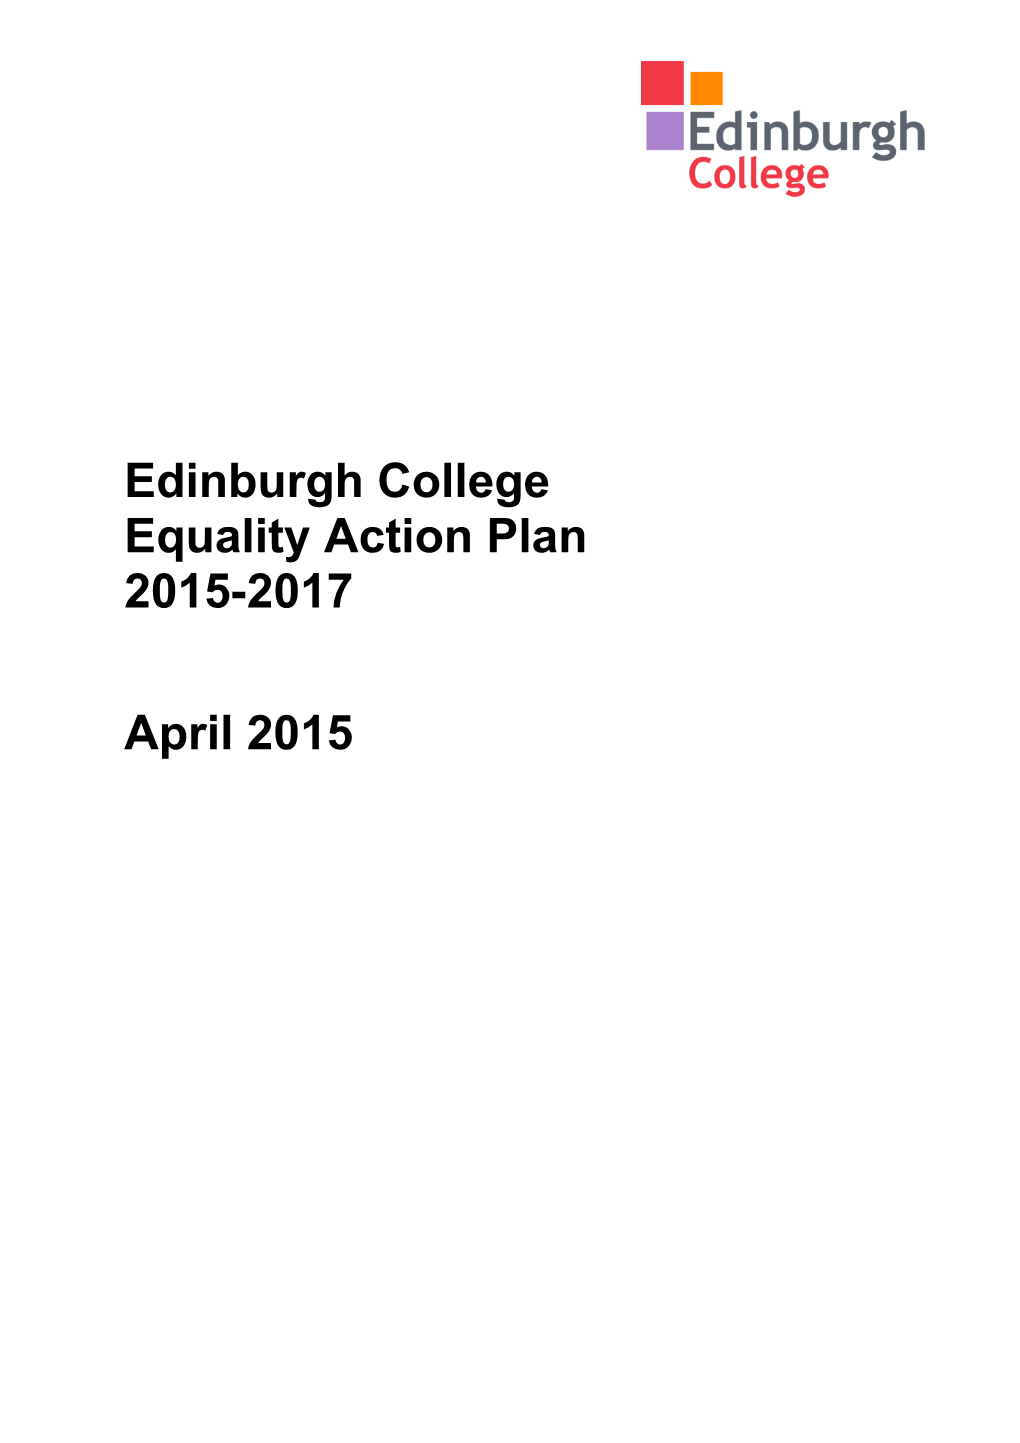 Equality Action Plan